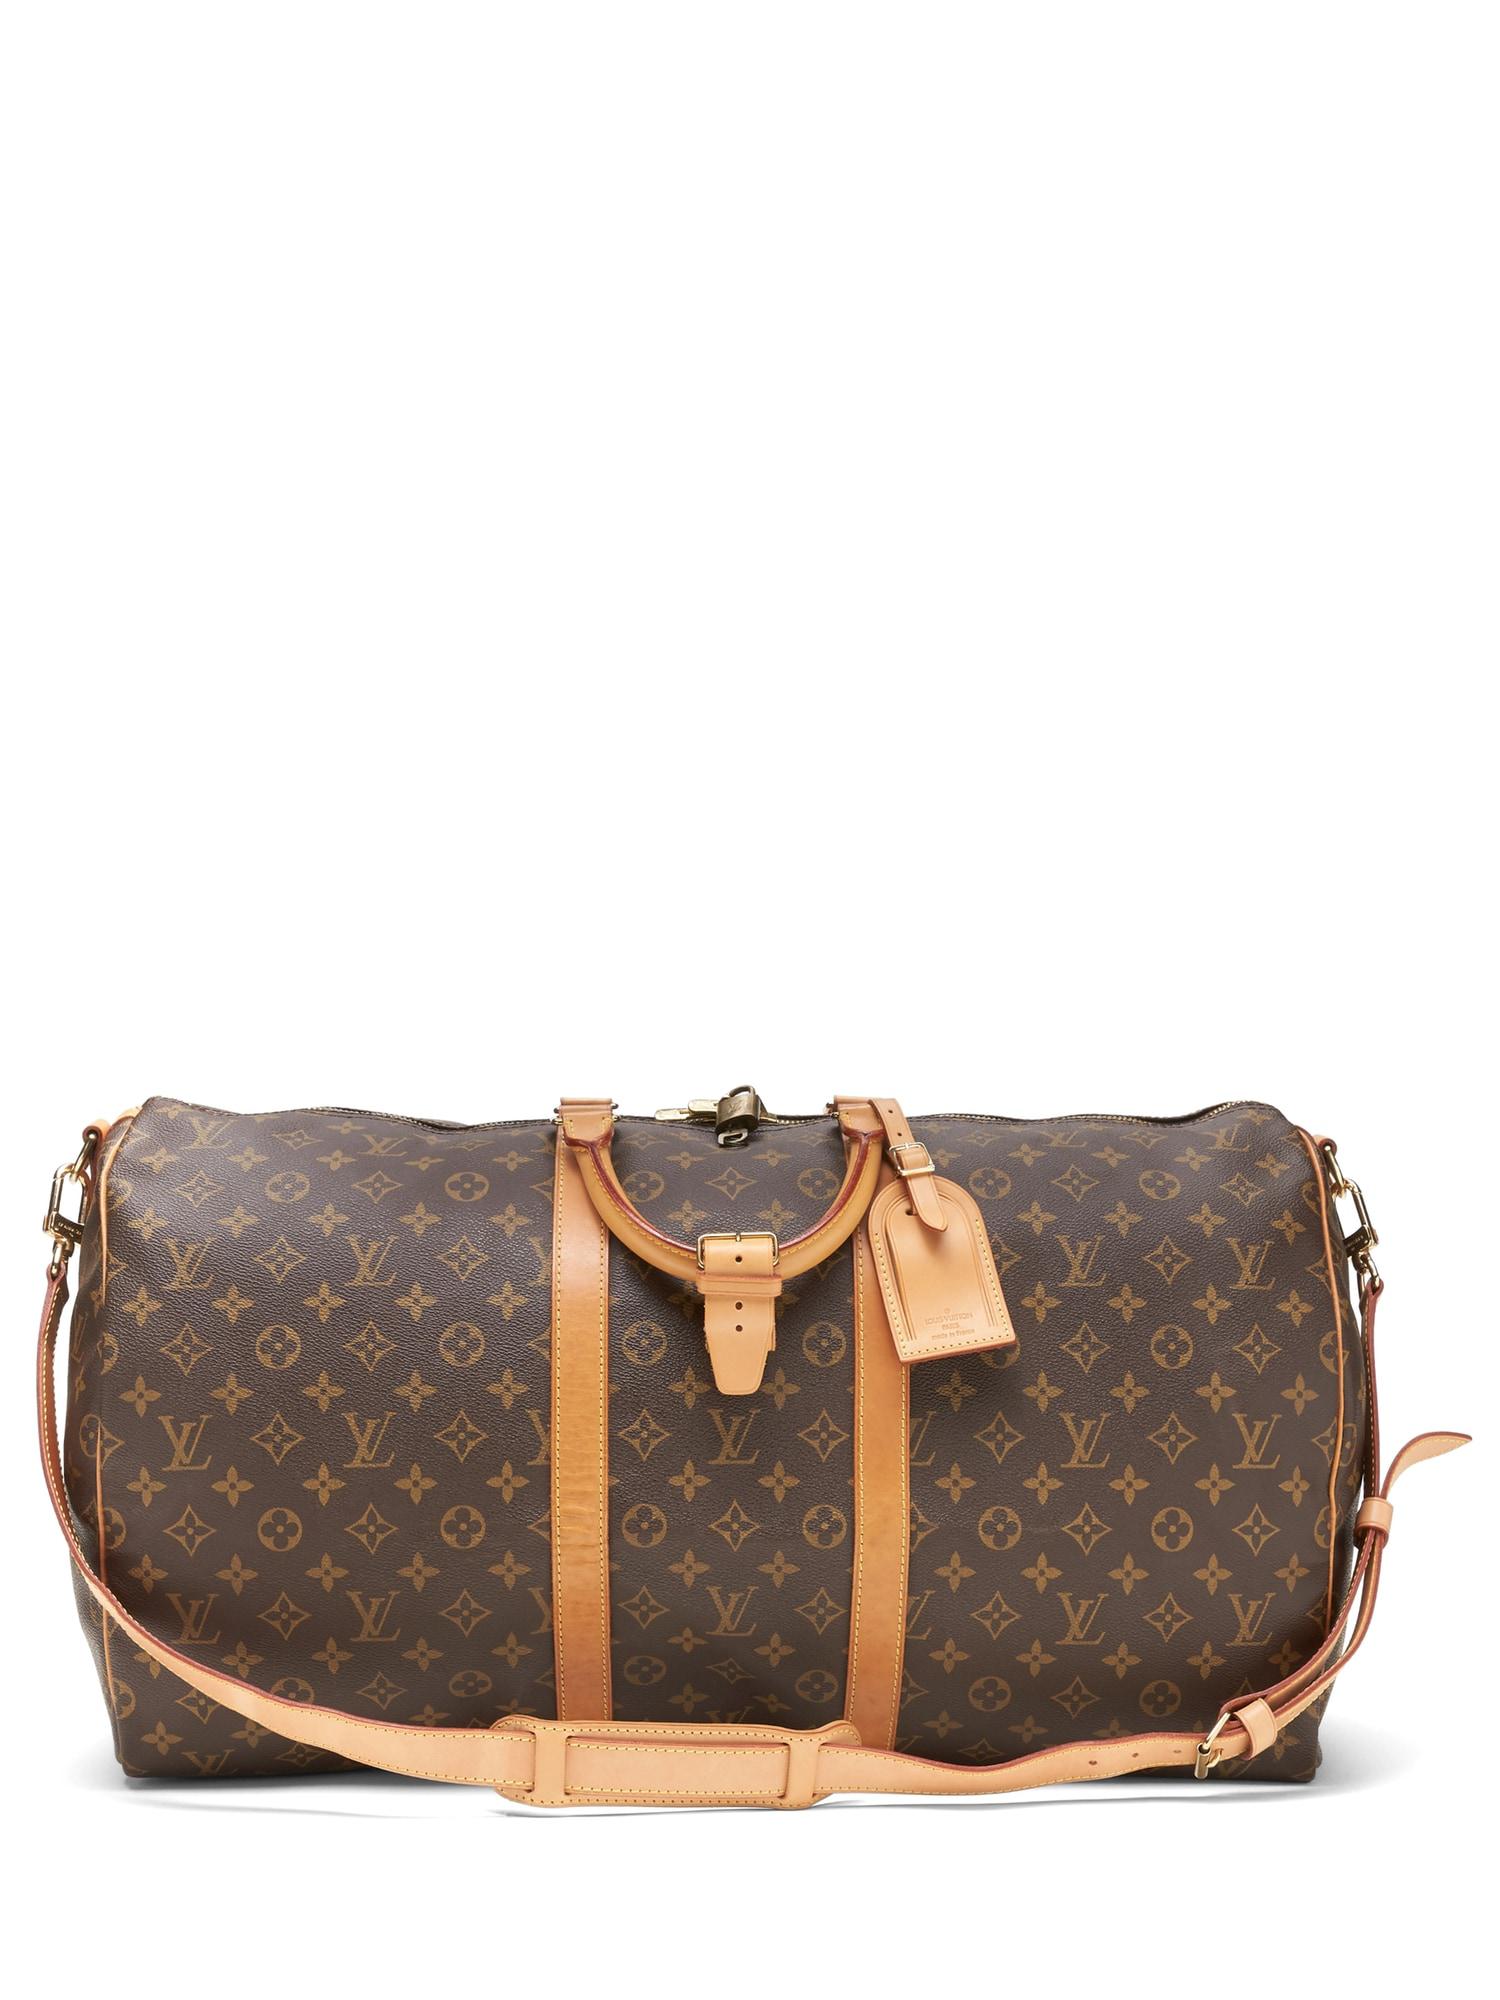 Banana Republic Luxe Finds | Louis Vuitton Monogram Keepall Bandoulière 55 in Brown - Lyst